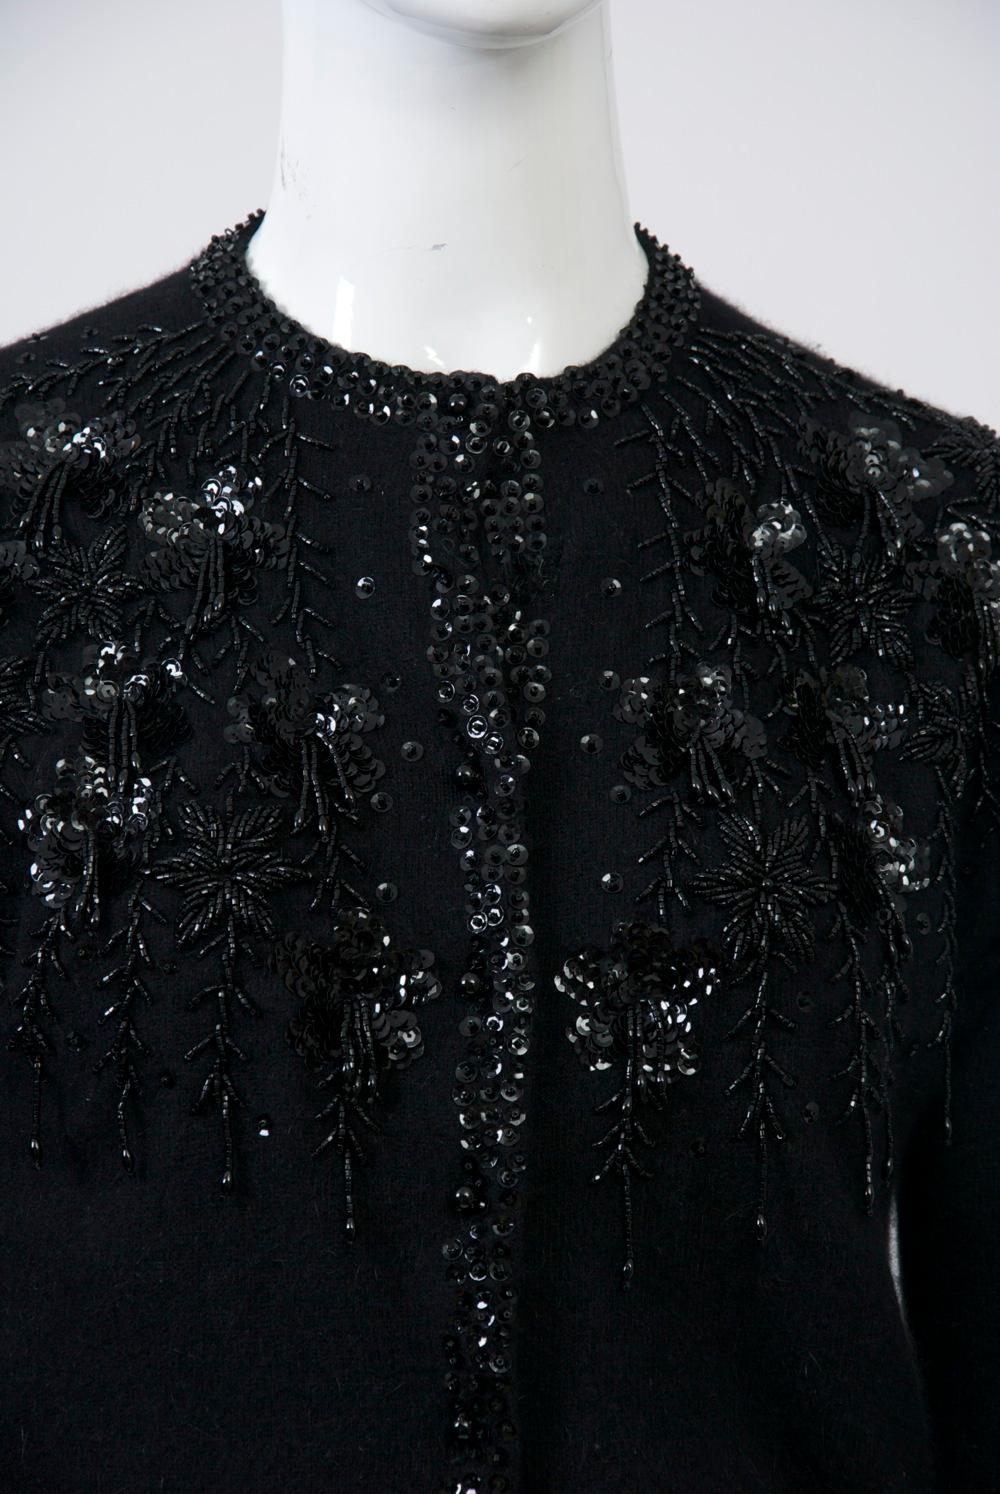 Black cardigan from the 1950s-'60s embellished with black beads and sequins. Sweater composition is lambswool, angora and nylon and has tiny spherical buttons. Lined. Retailed by Gimbels department store, which was located on 34th St. in NYC.